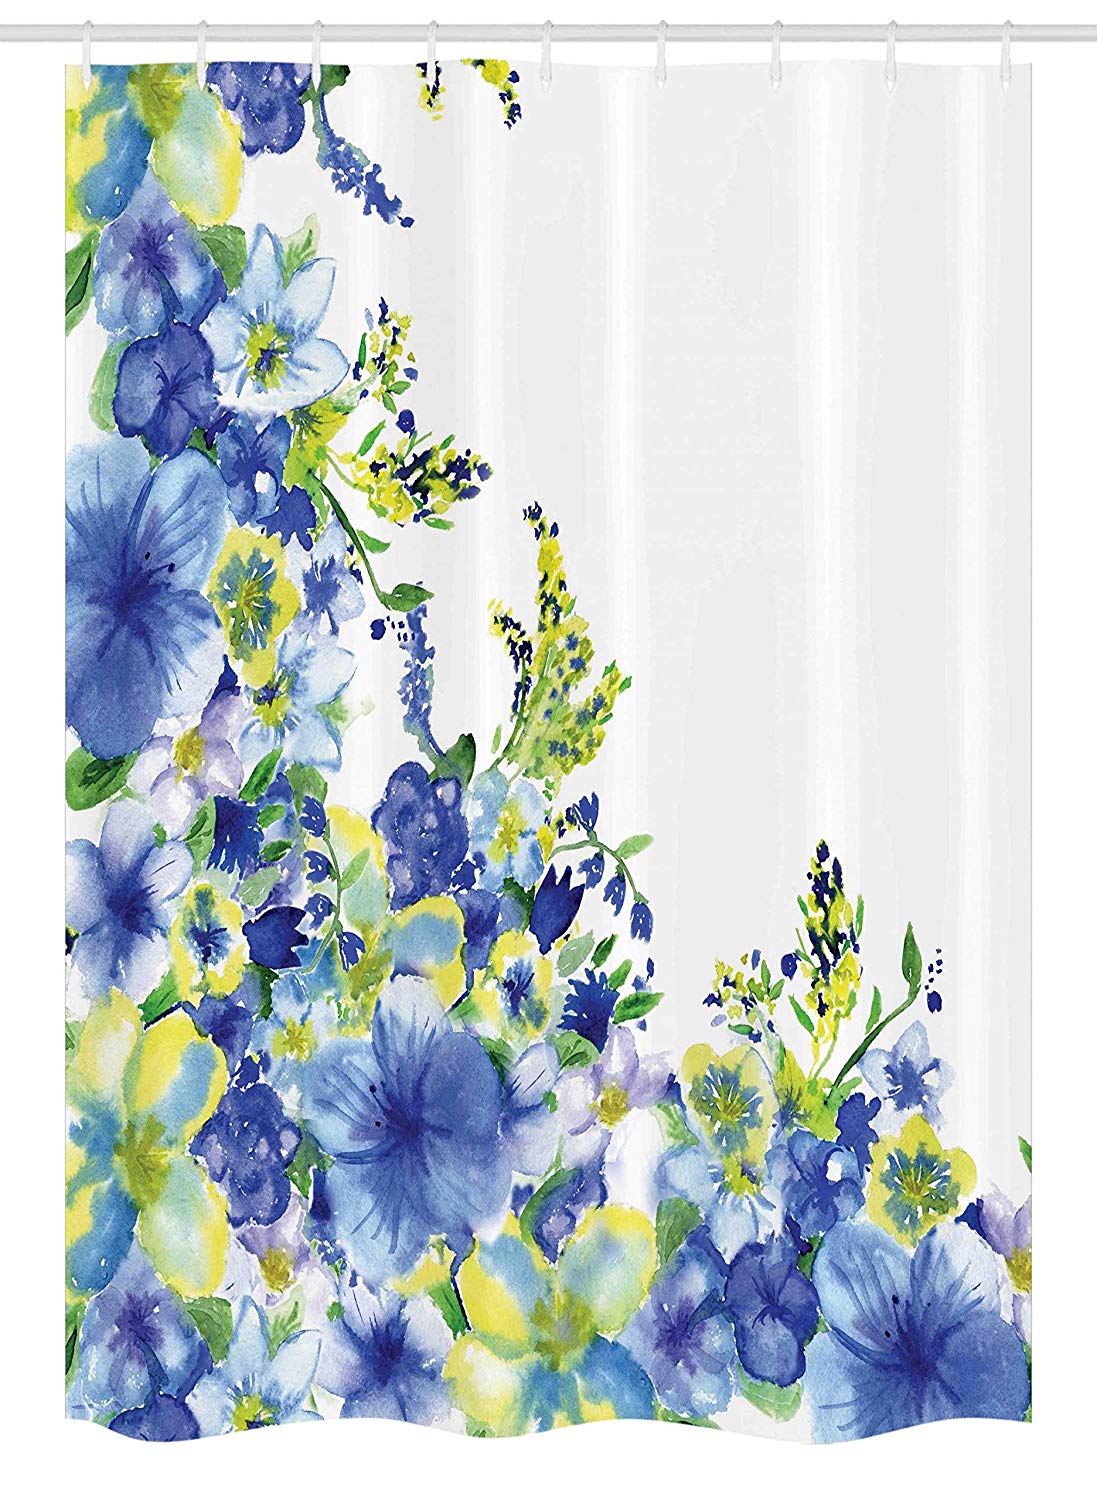 Ambesonne Watercolor Flower Stall Shower Curtain, Motley Floret Motifs with Splash Anemone Iris Revival of Nature Theme, Fabric Bathroom Decor Set with Hooks, 54" X 78", Blue Yellow